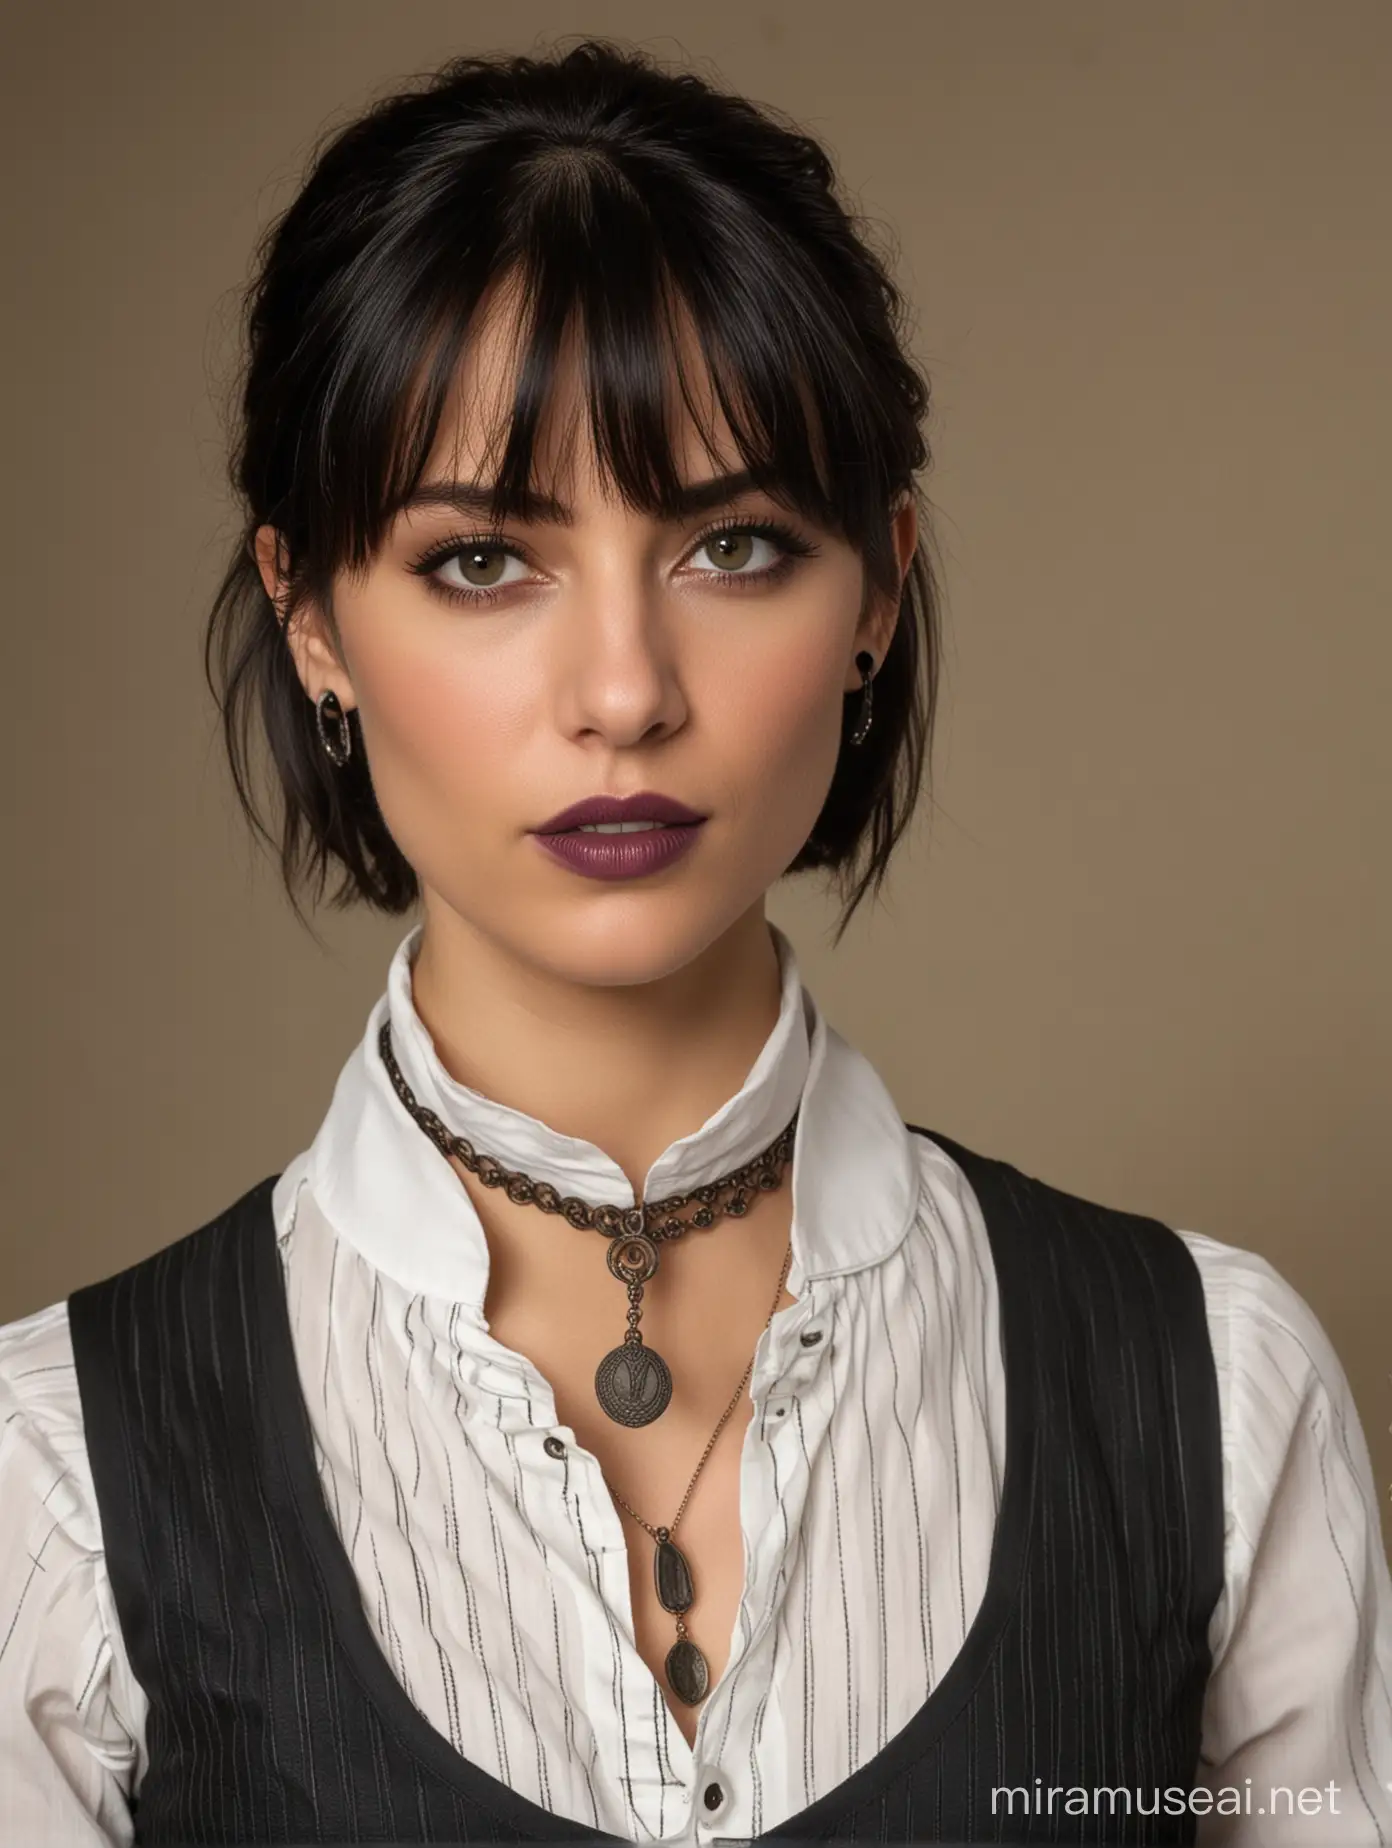 A French female detective with Egyptian features, with dark bob hair and bangs. She is wearing a white thin striped blouse slightly open on the first row of buttons and over the blouse over a dark vest. She is wearing black forensic gloves. She has a piercing with an obsidian set in his left nostril. She has two large hoop earrings. She has a necklace with an Ank as a pendant.She has dark and thin eyes. short, plump lips with dark purple lipstick